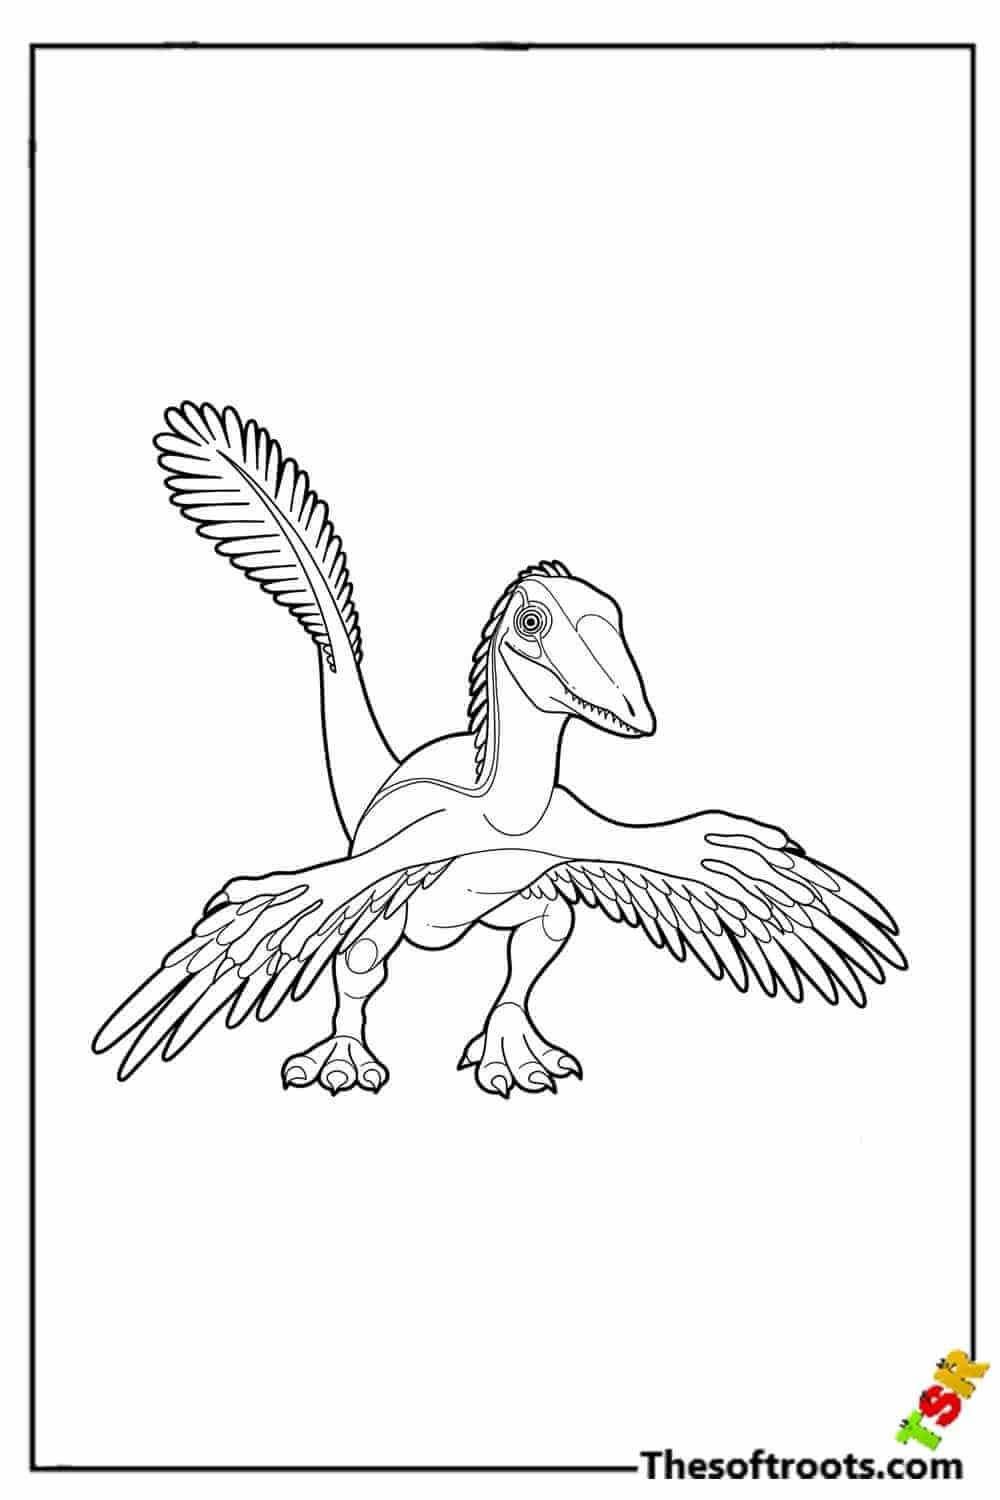 Adult Dinosaur coloring pages